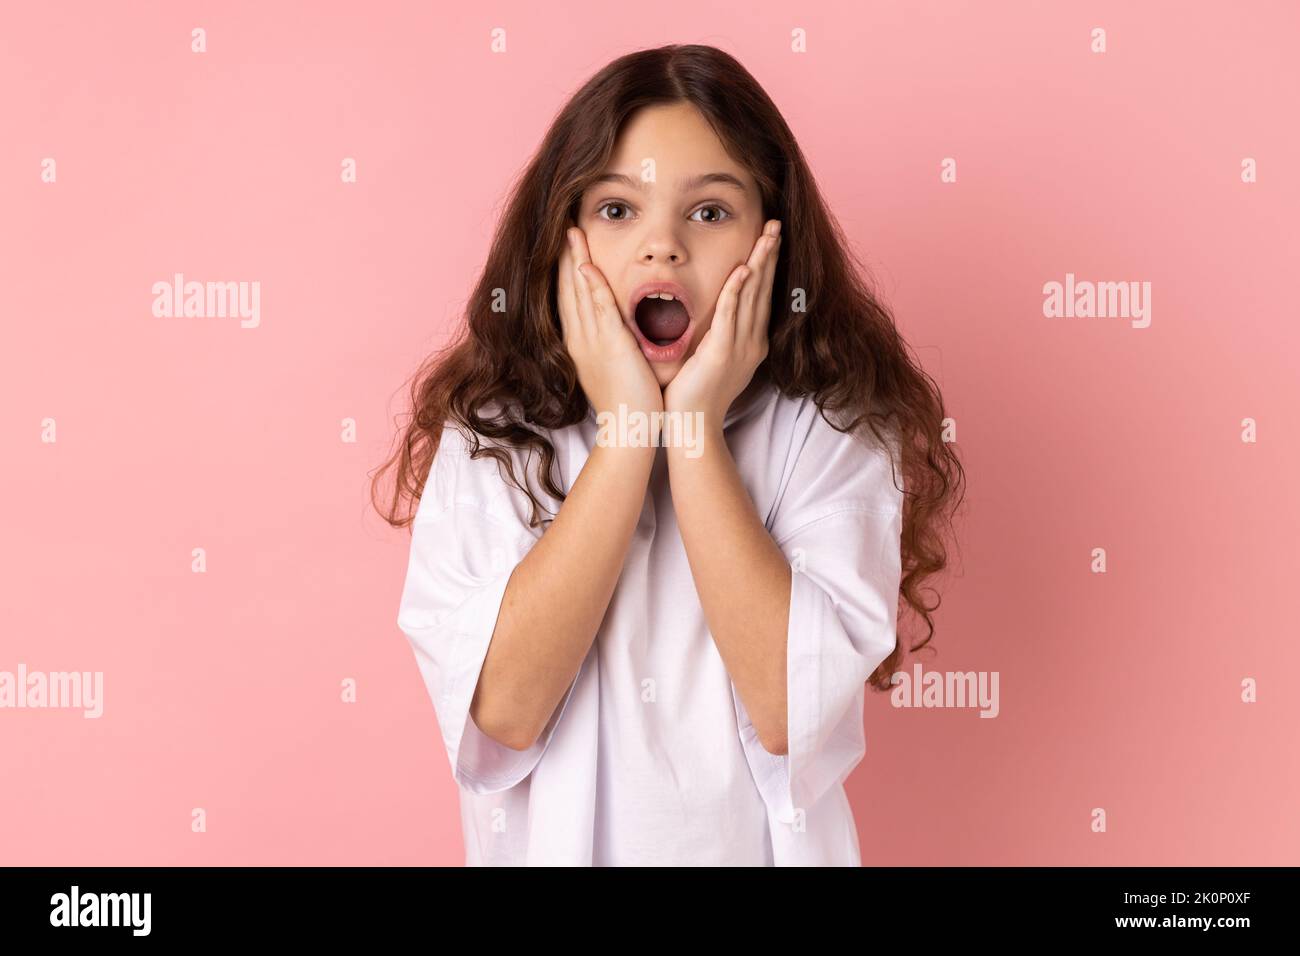 Portrait of amazed little girl wearing white T-shirt standing with hands on cheeks, looking at camera with big eye, saying wow. Indoor studio shot isolated on pink background. Stock Photo